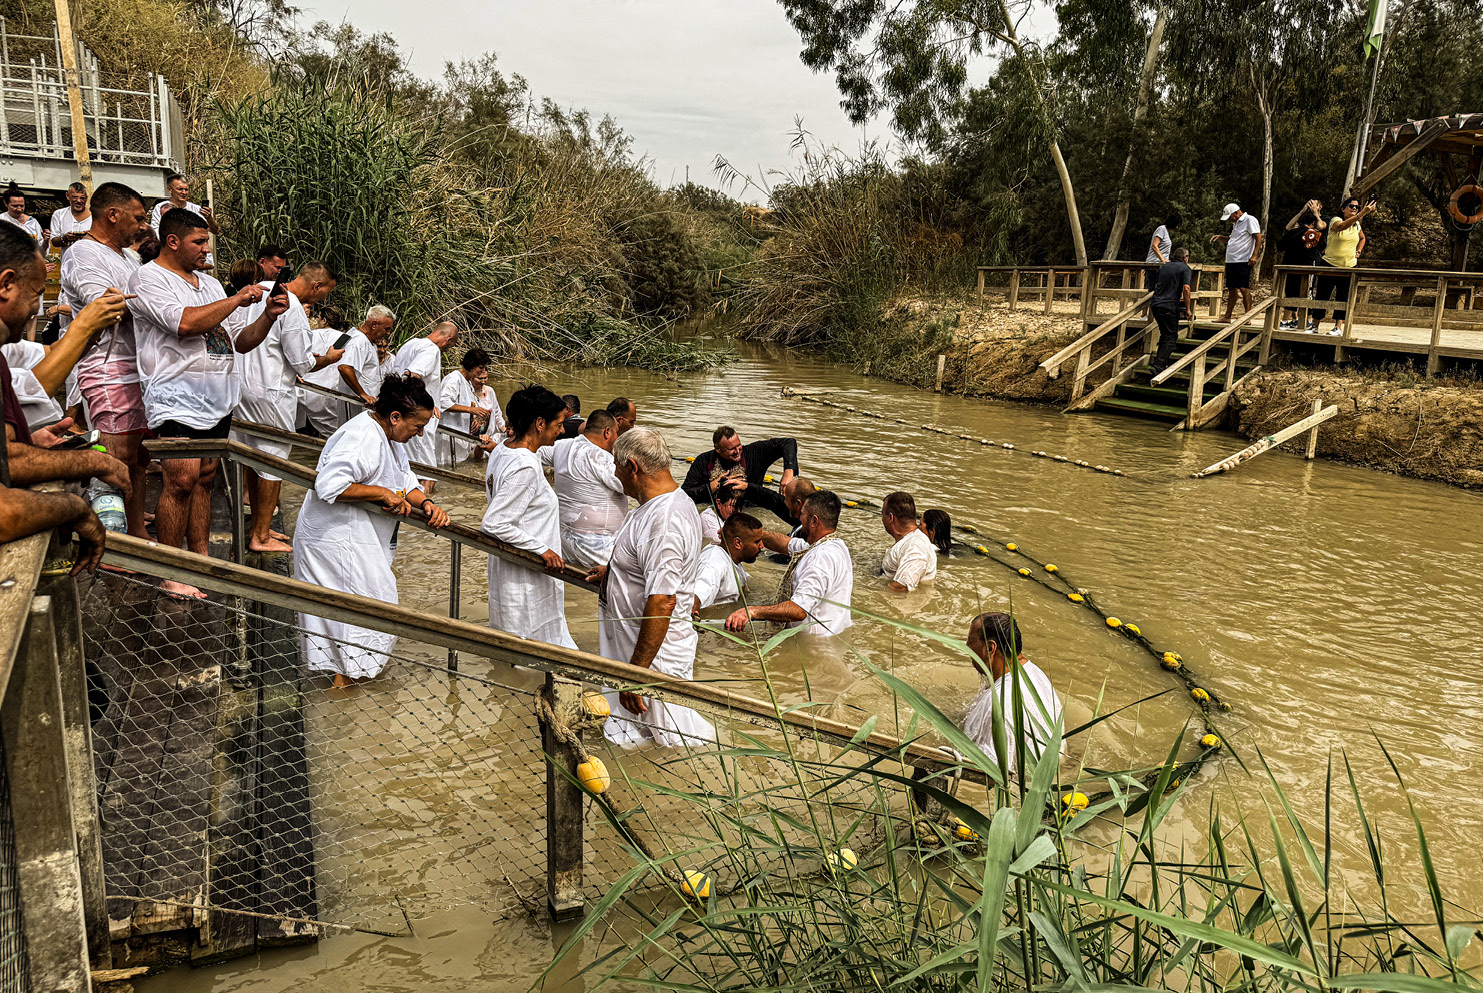 With clergies’ assistance, hundreds of Christians daily take a baptismal dunk in the Israeli-controlled West Bank of the Jordan River; John baptized Jesus on the Jordanian side.